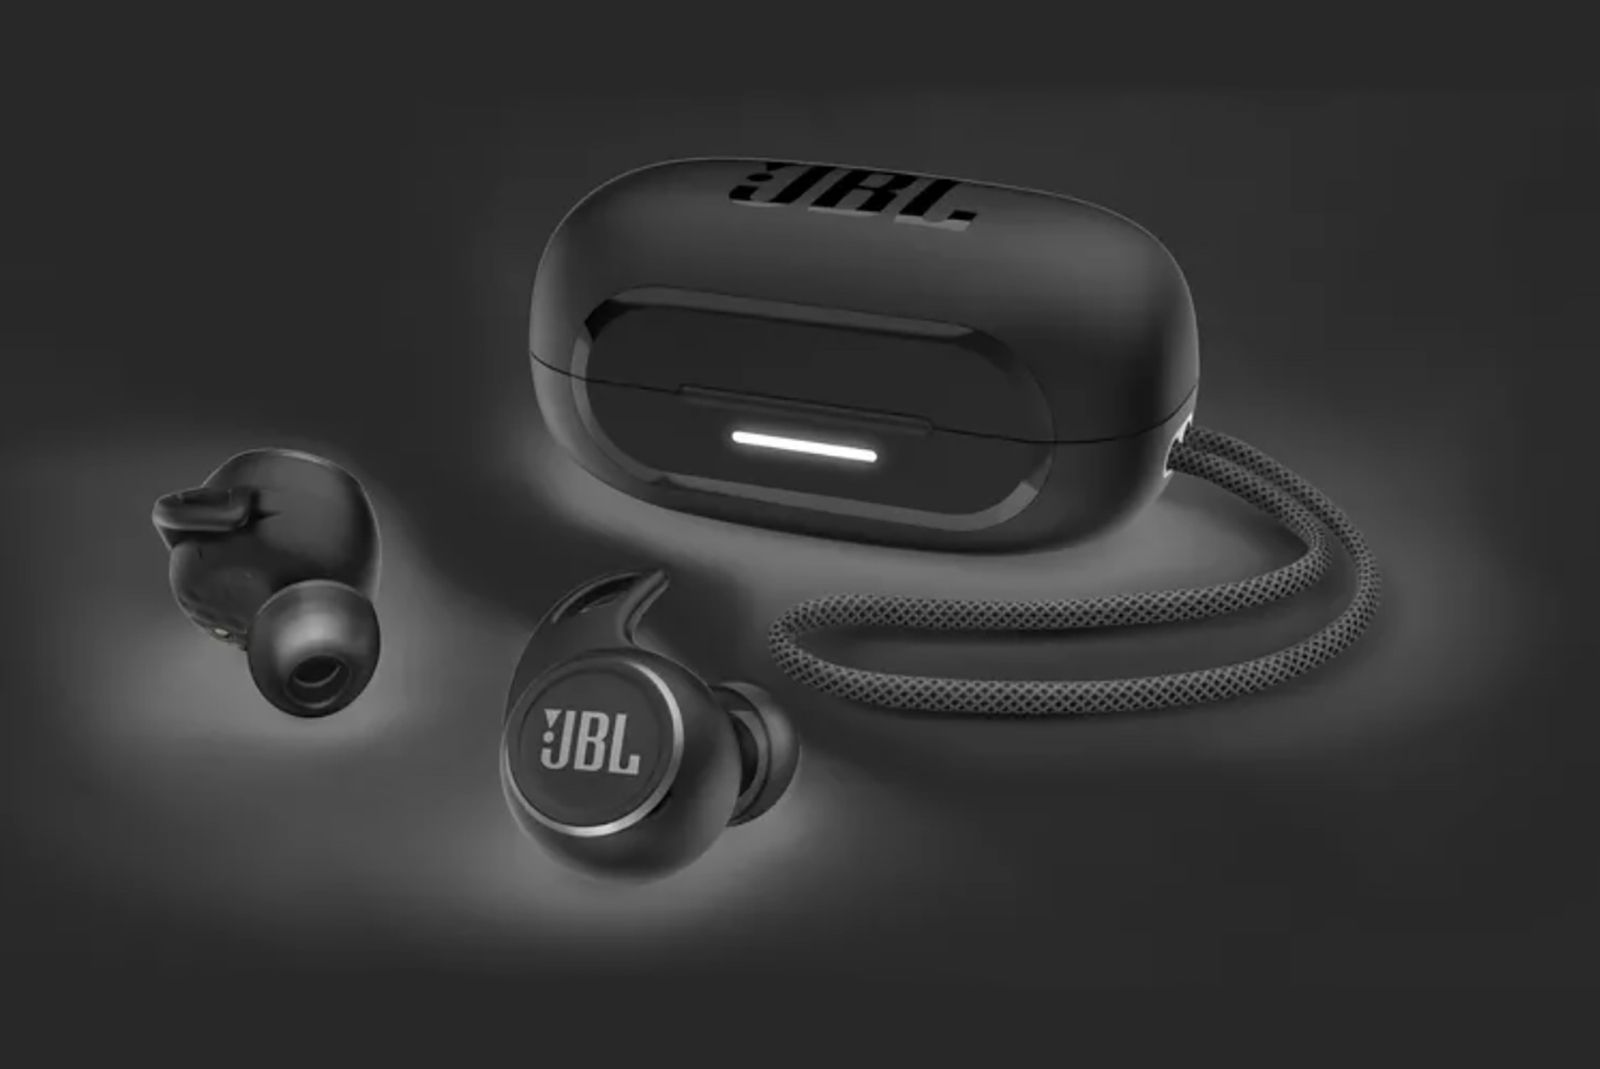 JBL rolls out several Bluetooth speakers and wireless earbuds at CES 2022 photo 7